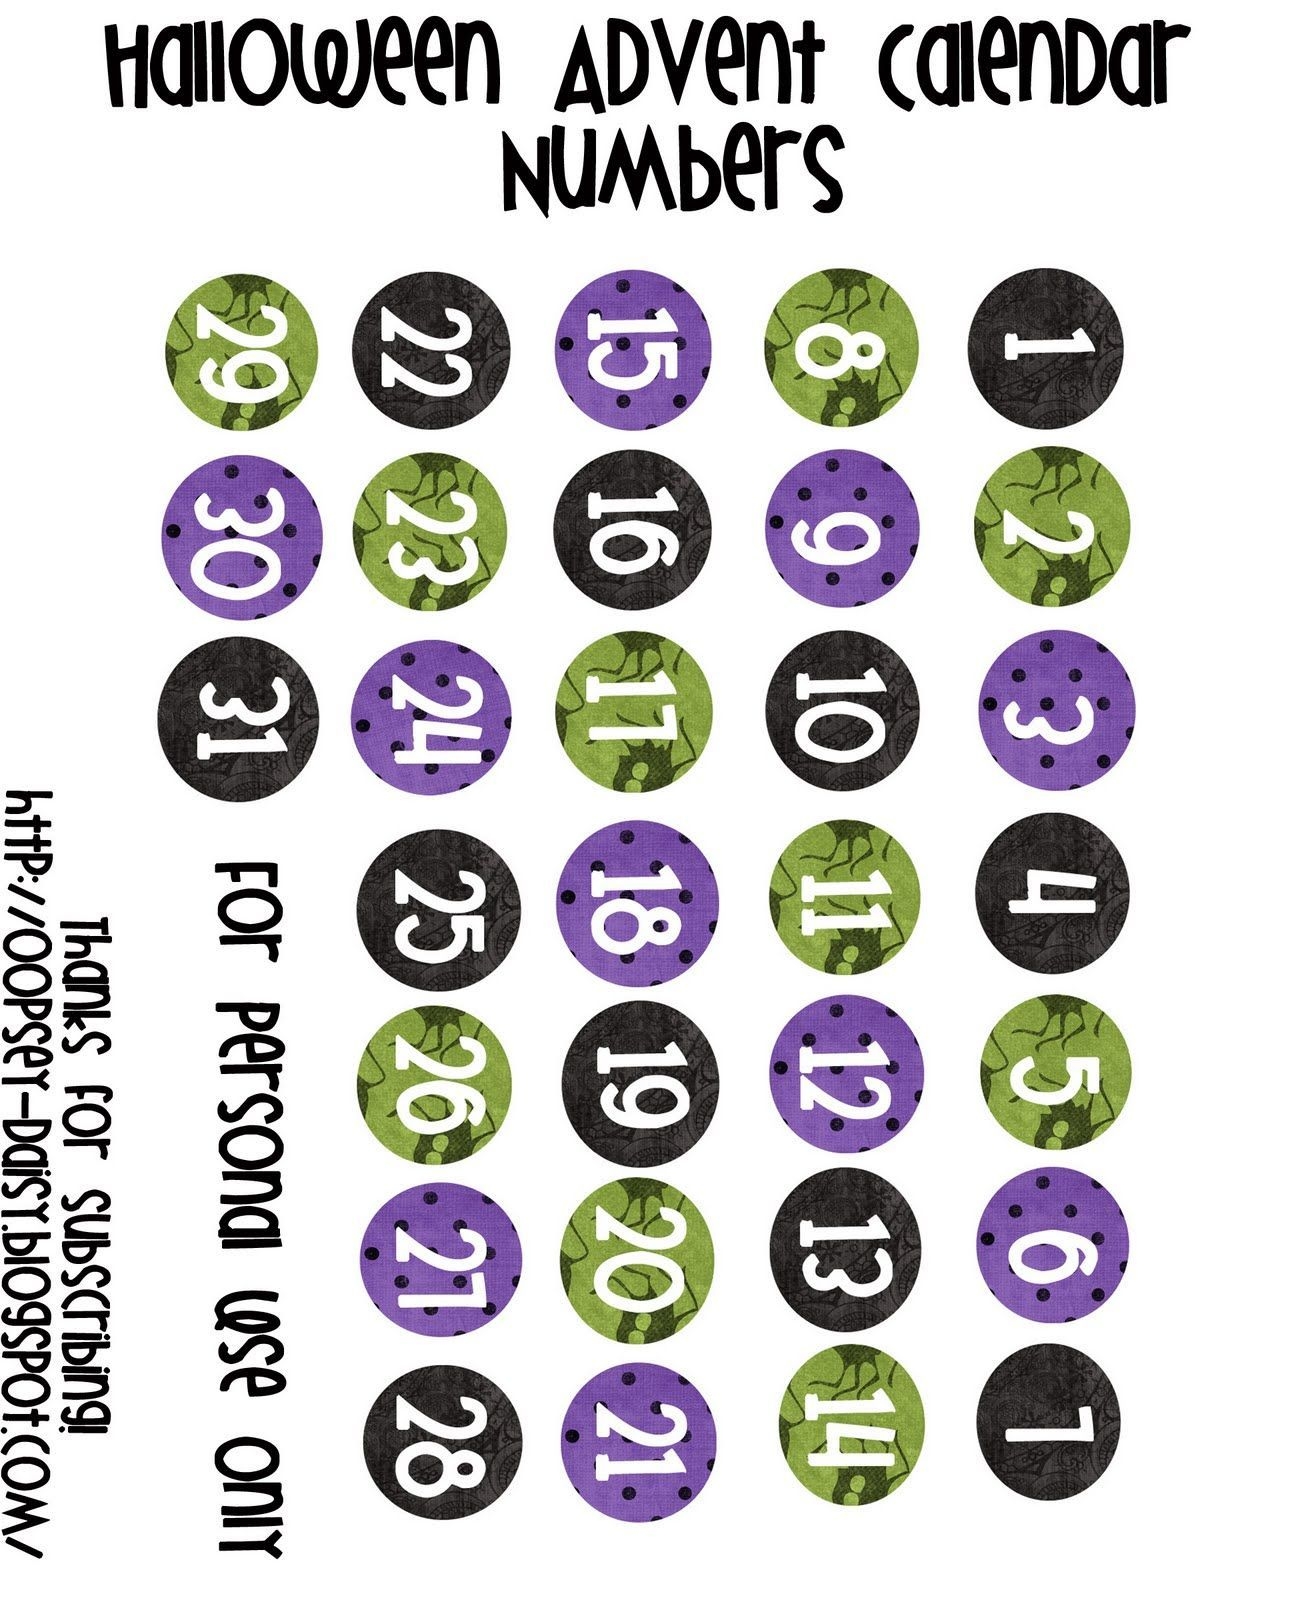 Halloween Advent Numbers (Turn Into Magnets) Printable